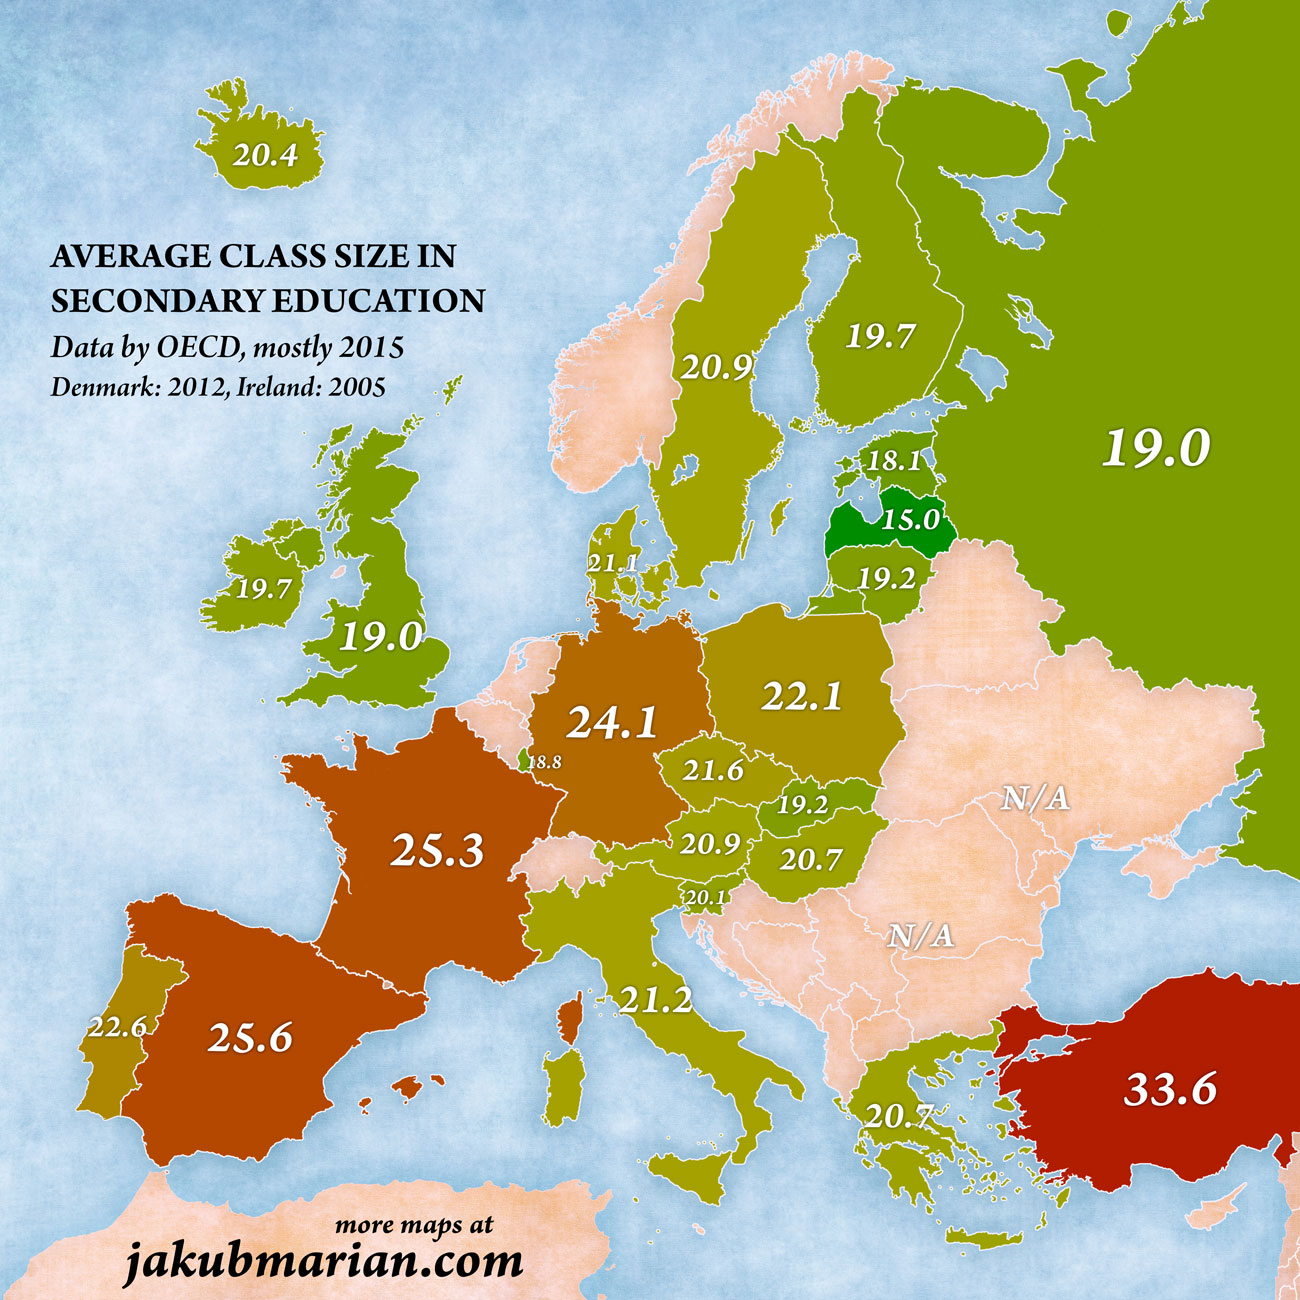 Average class size in lower secondary education